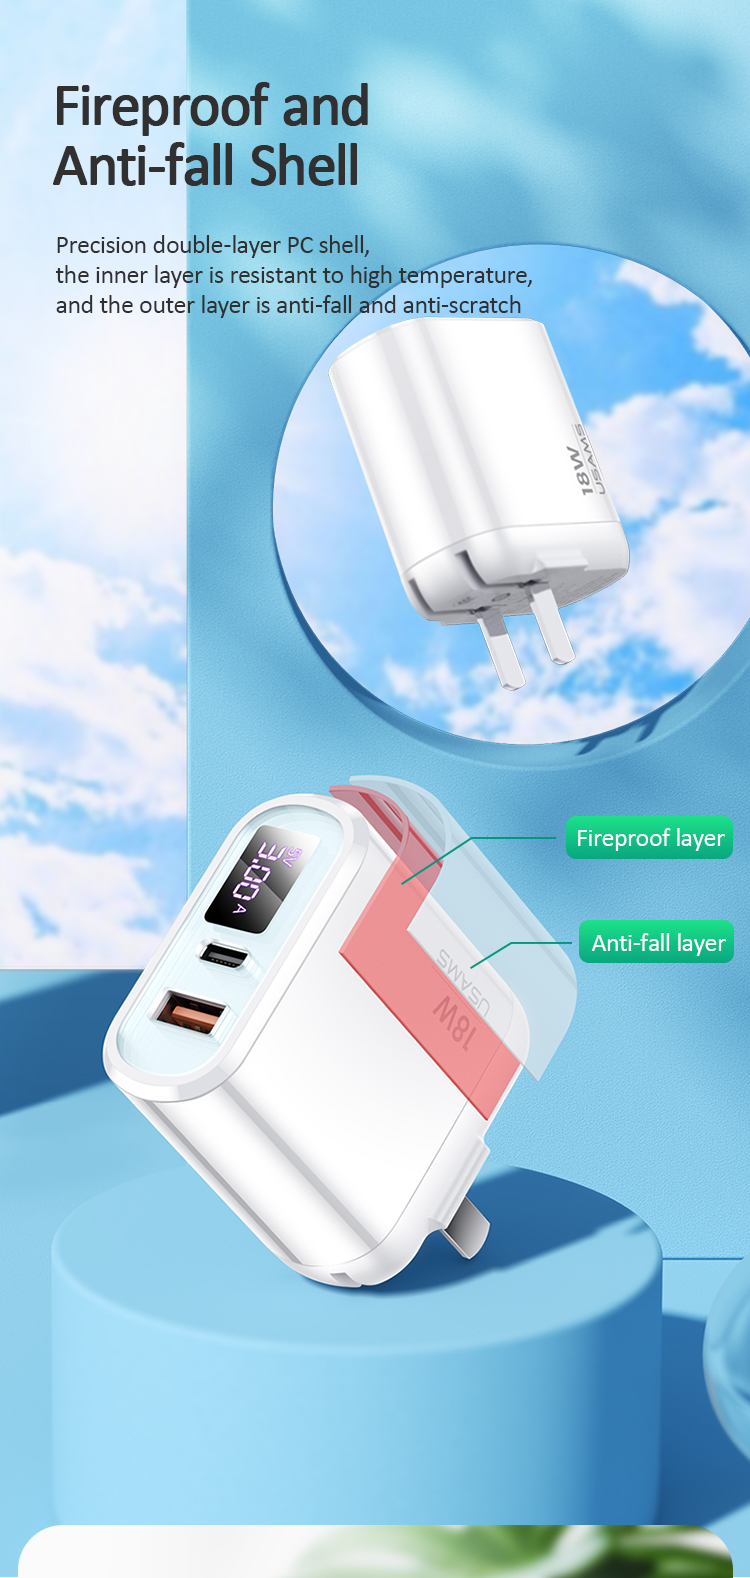 USAMS T30 18W QC3.0 PD3.0 Digital Display Fast Travel USB Charger for Samsung S10 for iPhone 11 Pro Max Huawei LG